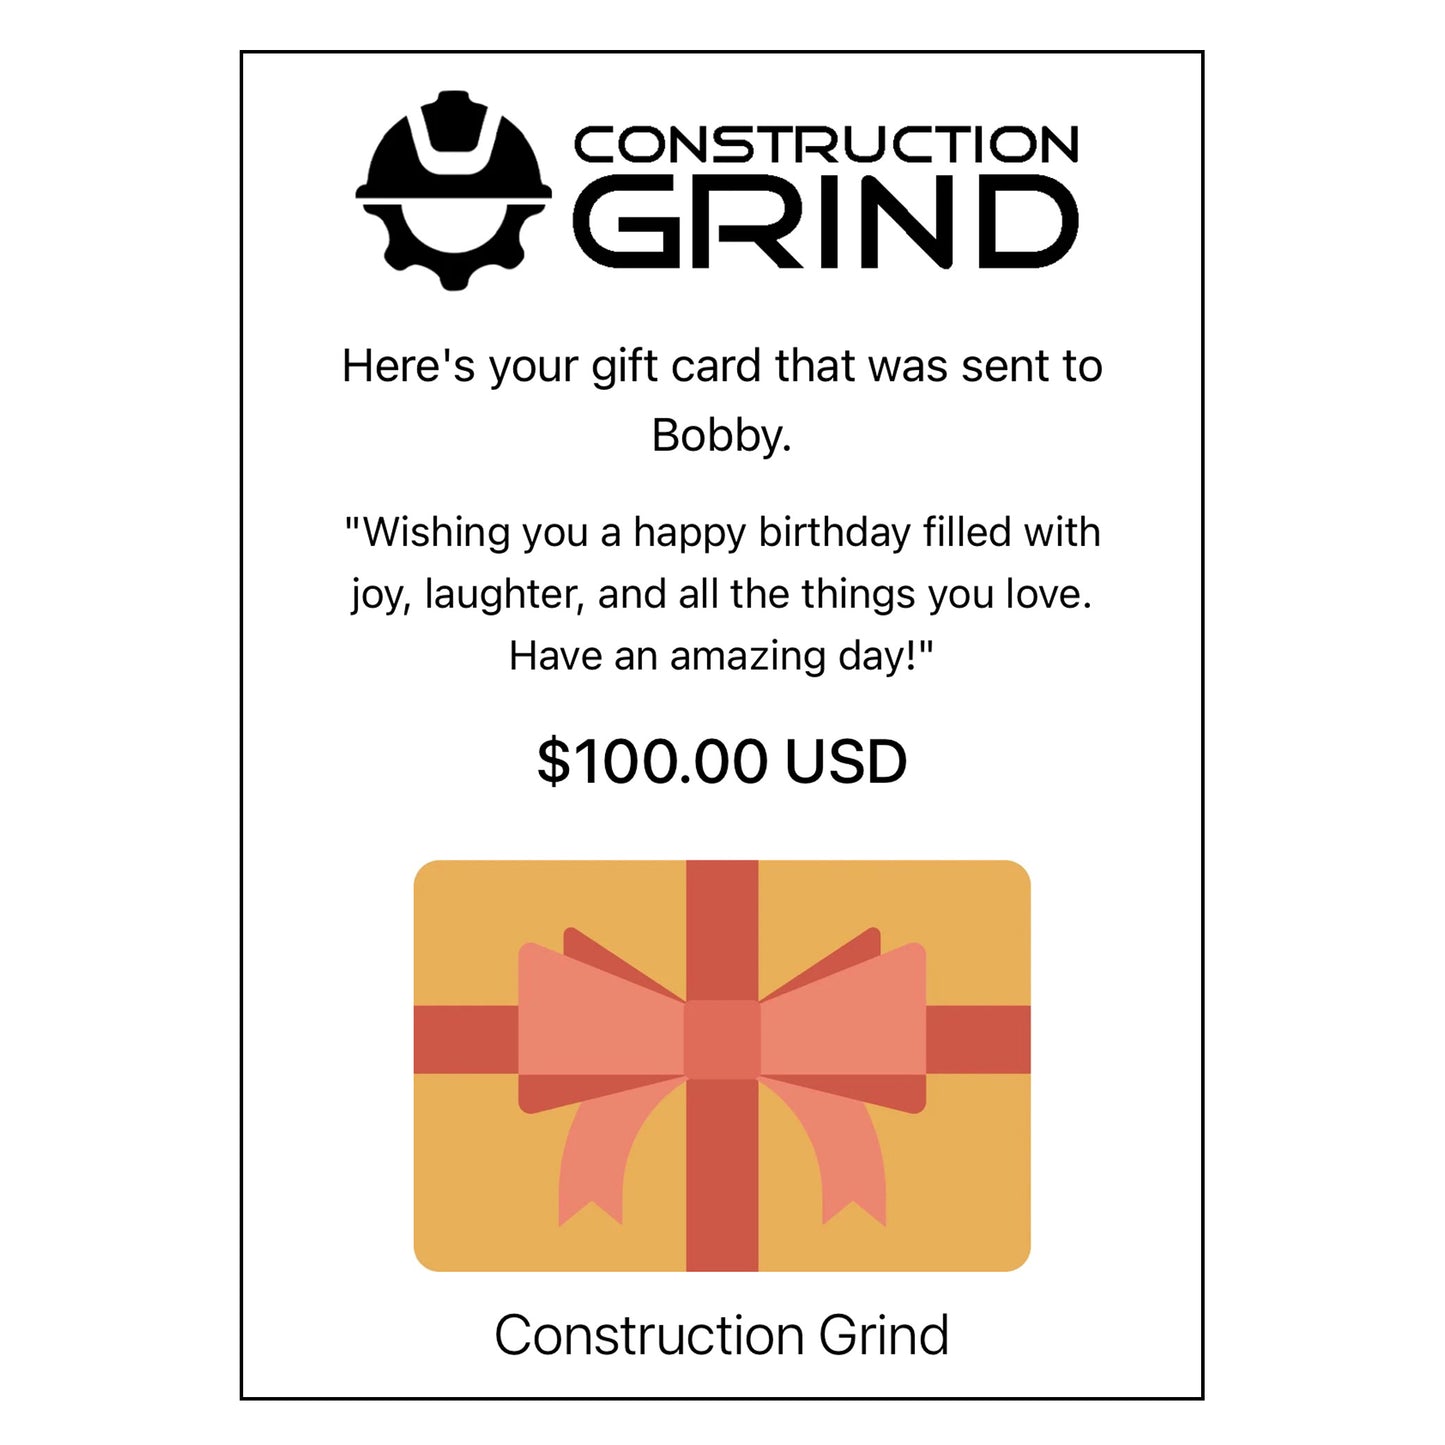 Construction Grind Electronic Gift Cards are the ideal solution for finding the perfect gift for that hard-to-shop-for special person who's working in any sector of the construction industry. Our gift cards are available in convenient increments of $10, $25, $50, $75, and $100. Gift cards are electronic and are sent to your recipient via email, including a personalized message from you.